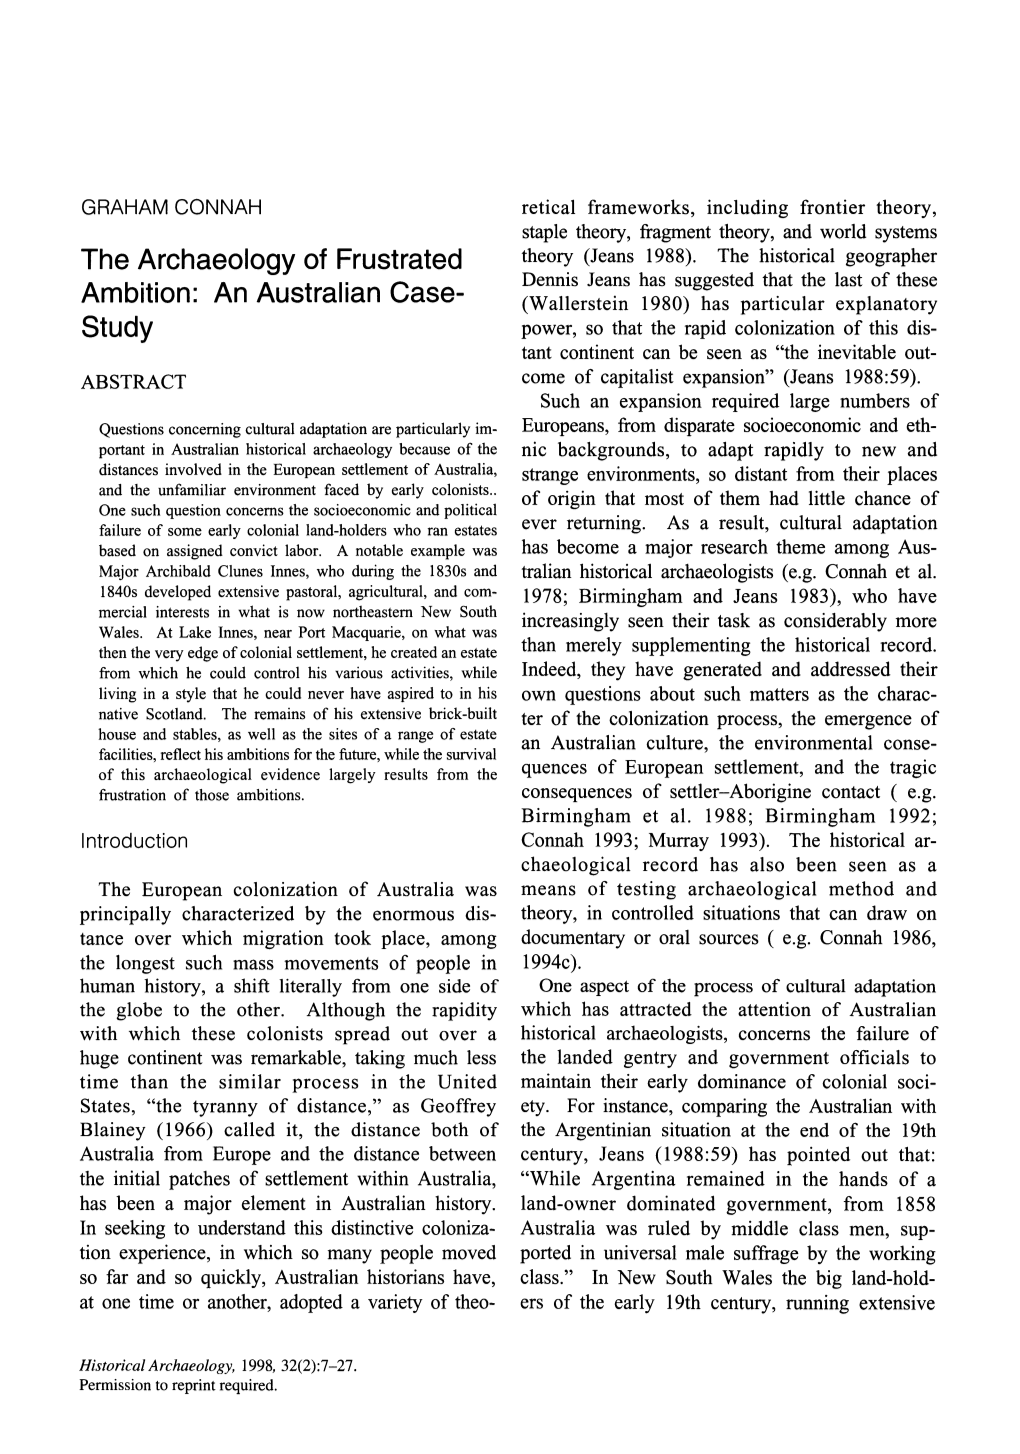 The Archaeology of Frustrated Ambition: an Australian Case- Study